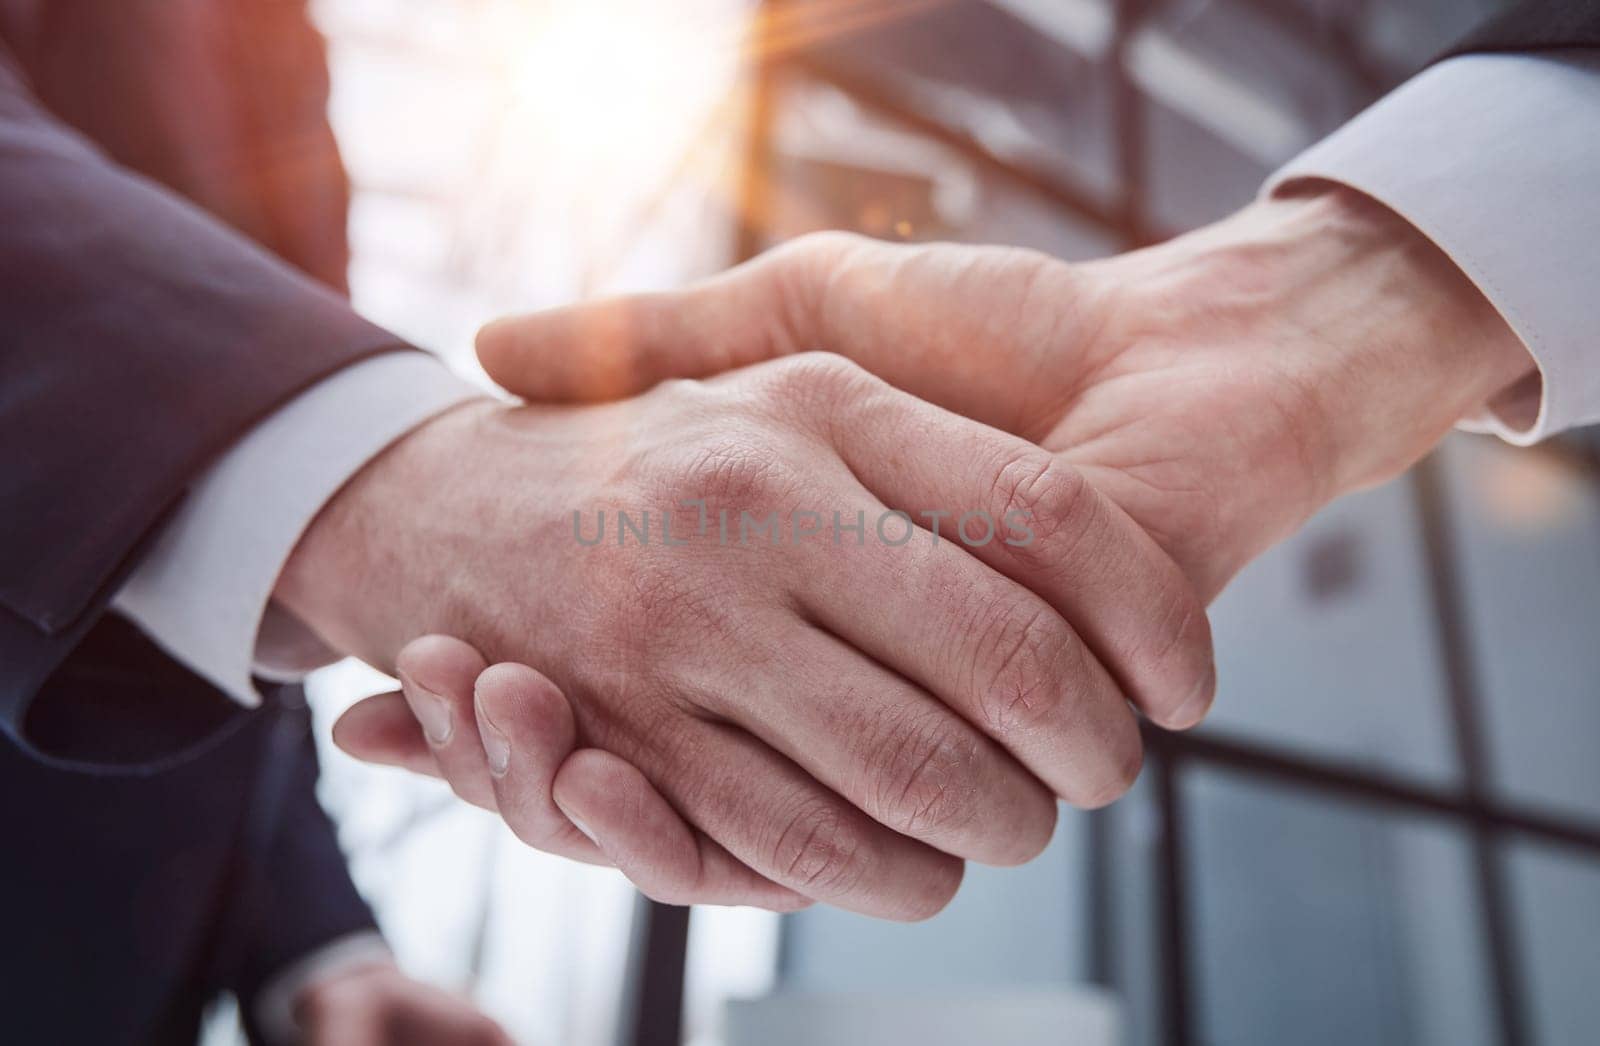 Handshake of two businessmen in a conference room, close-up